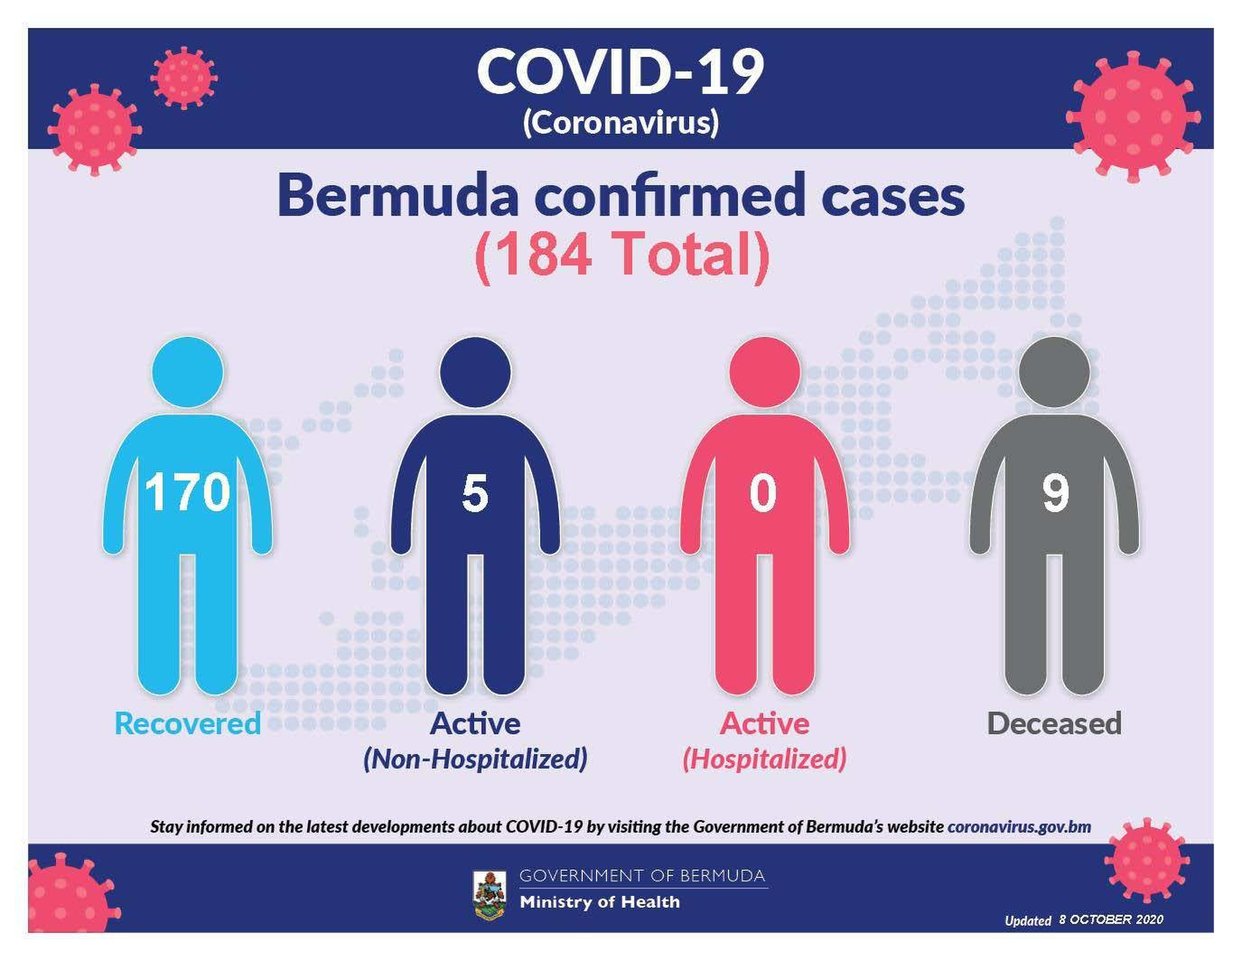 Two new COVID-19 cases reported in Bermuda, 8 October